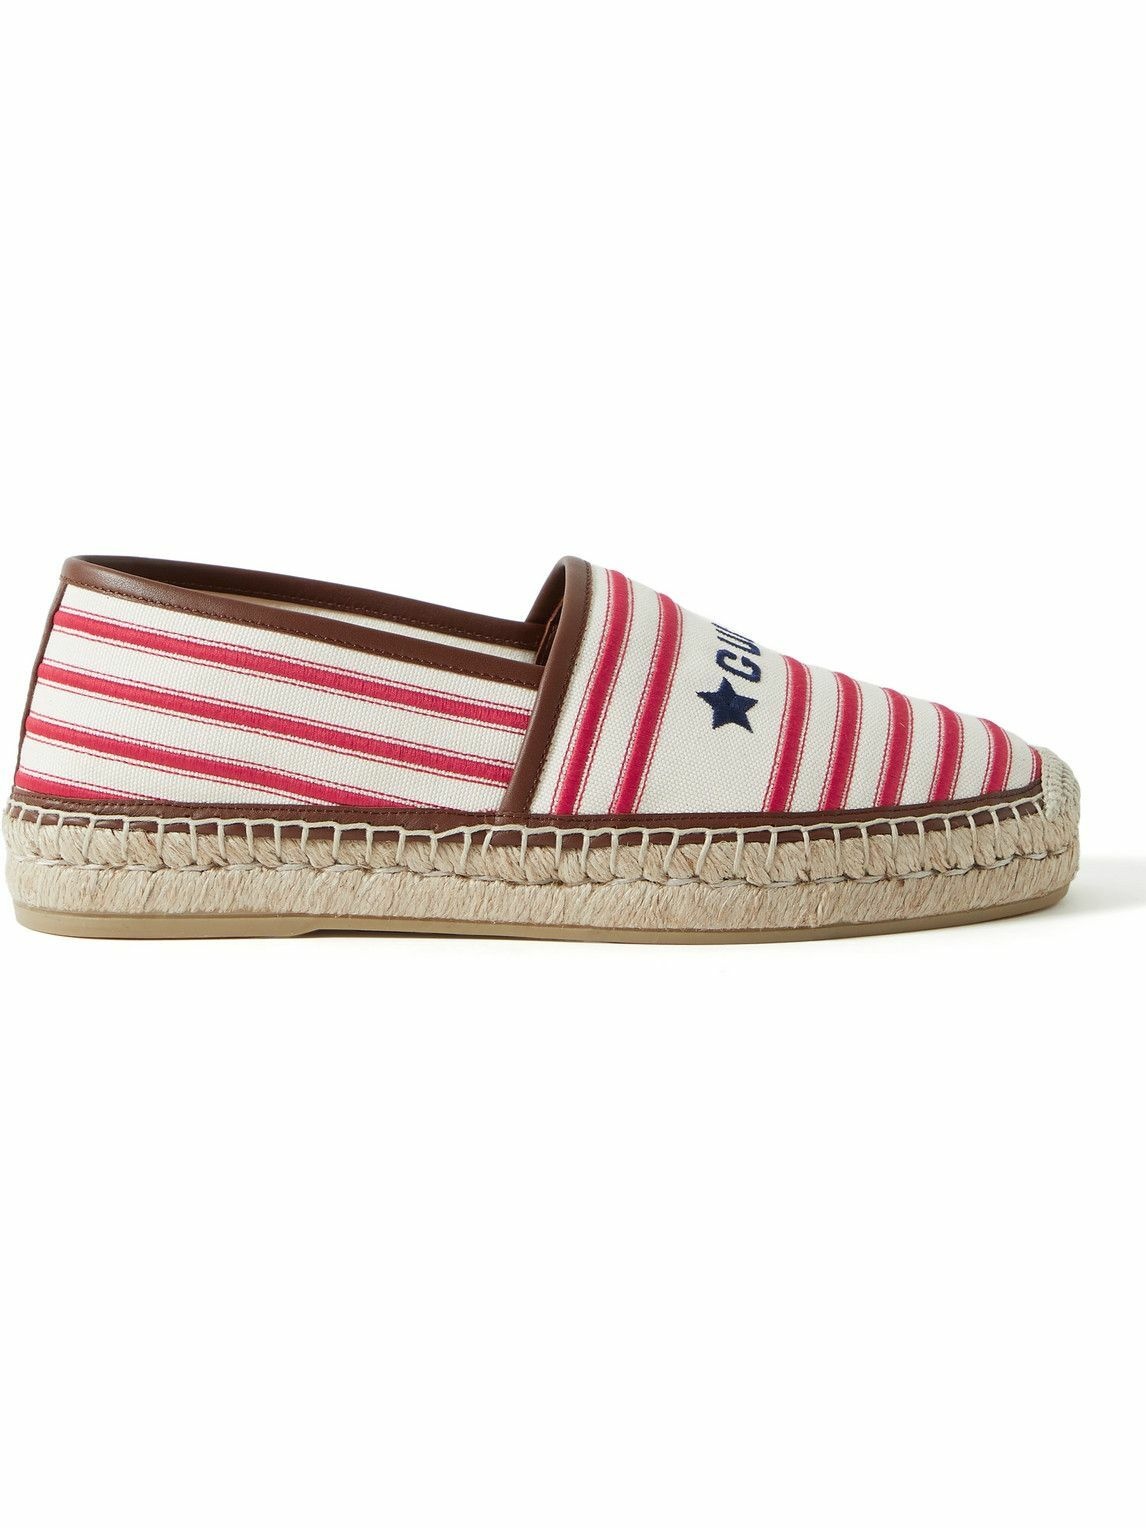 Photo: GUCCI - Leather-Trimmed Embroidered Canvas Espadrilles - Red